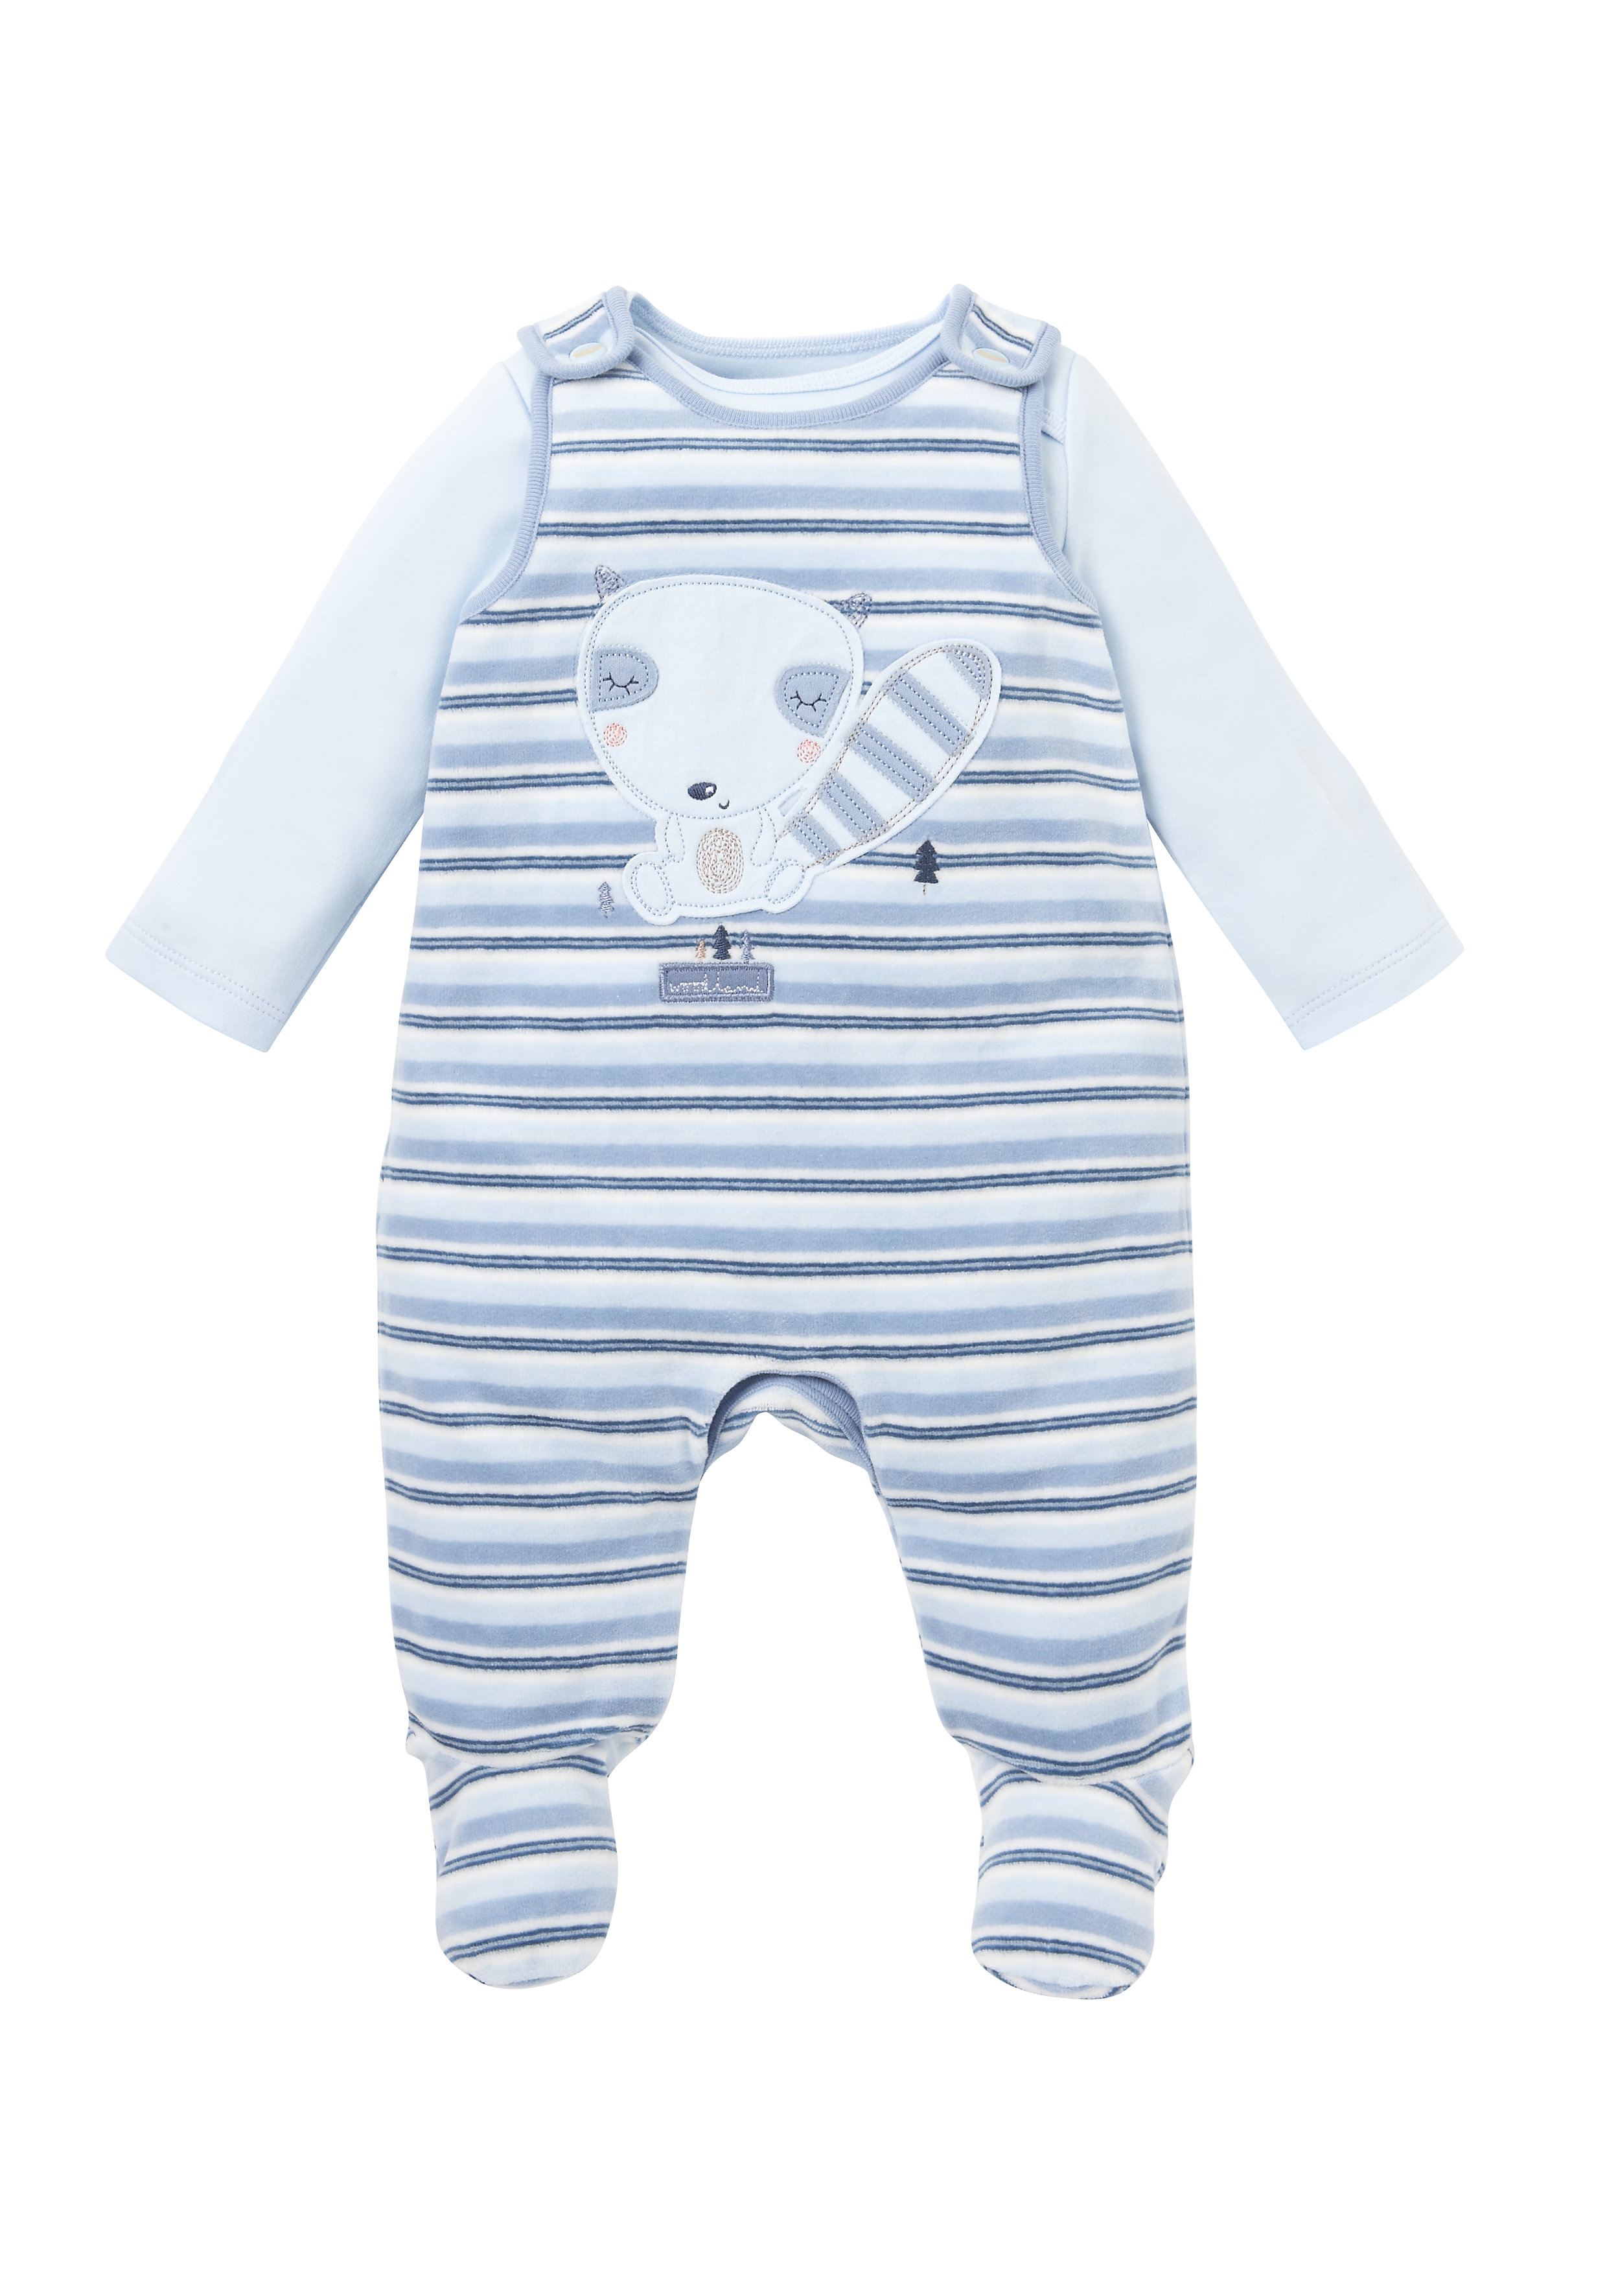 Mothercare | Boys Full Sleeves Striped Dungaree Set Animal Patchwork - Blue